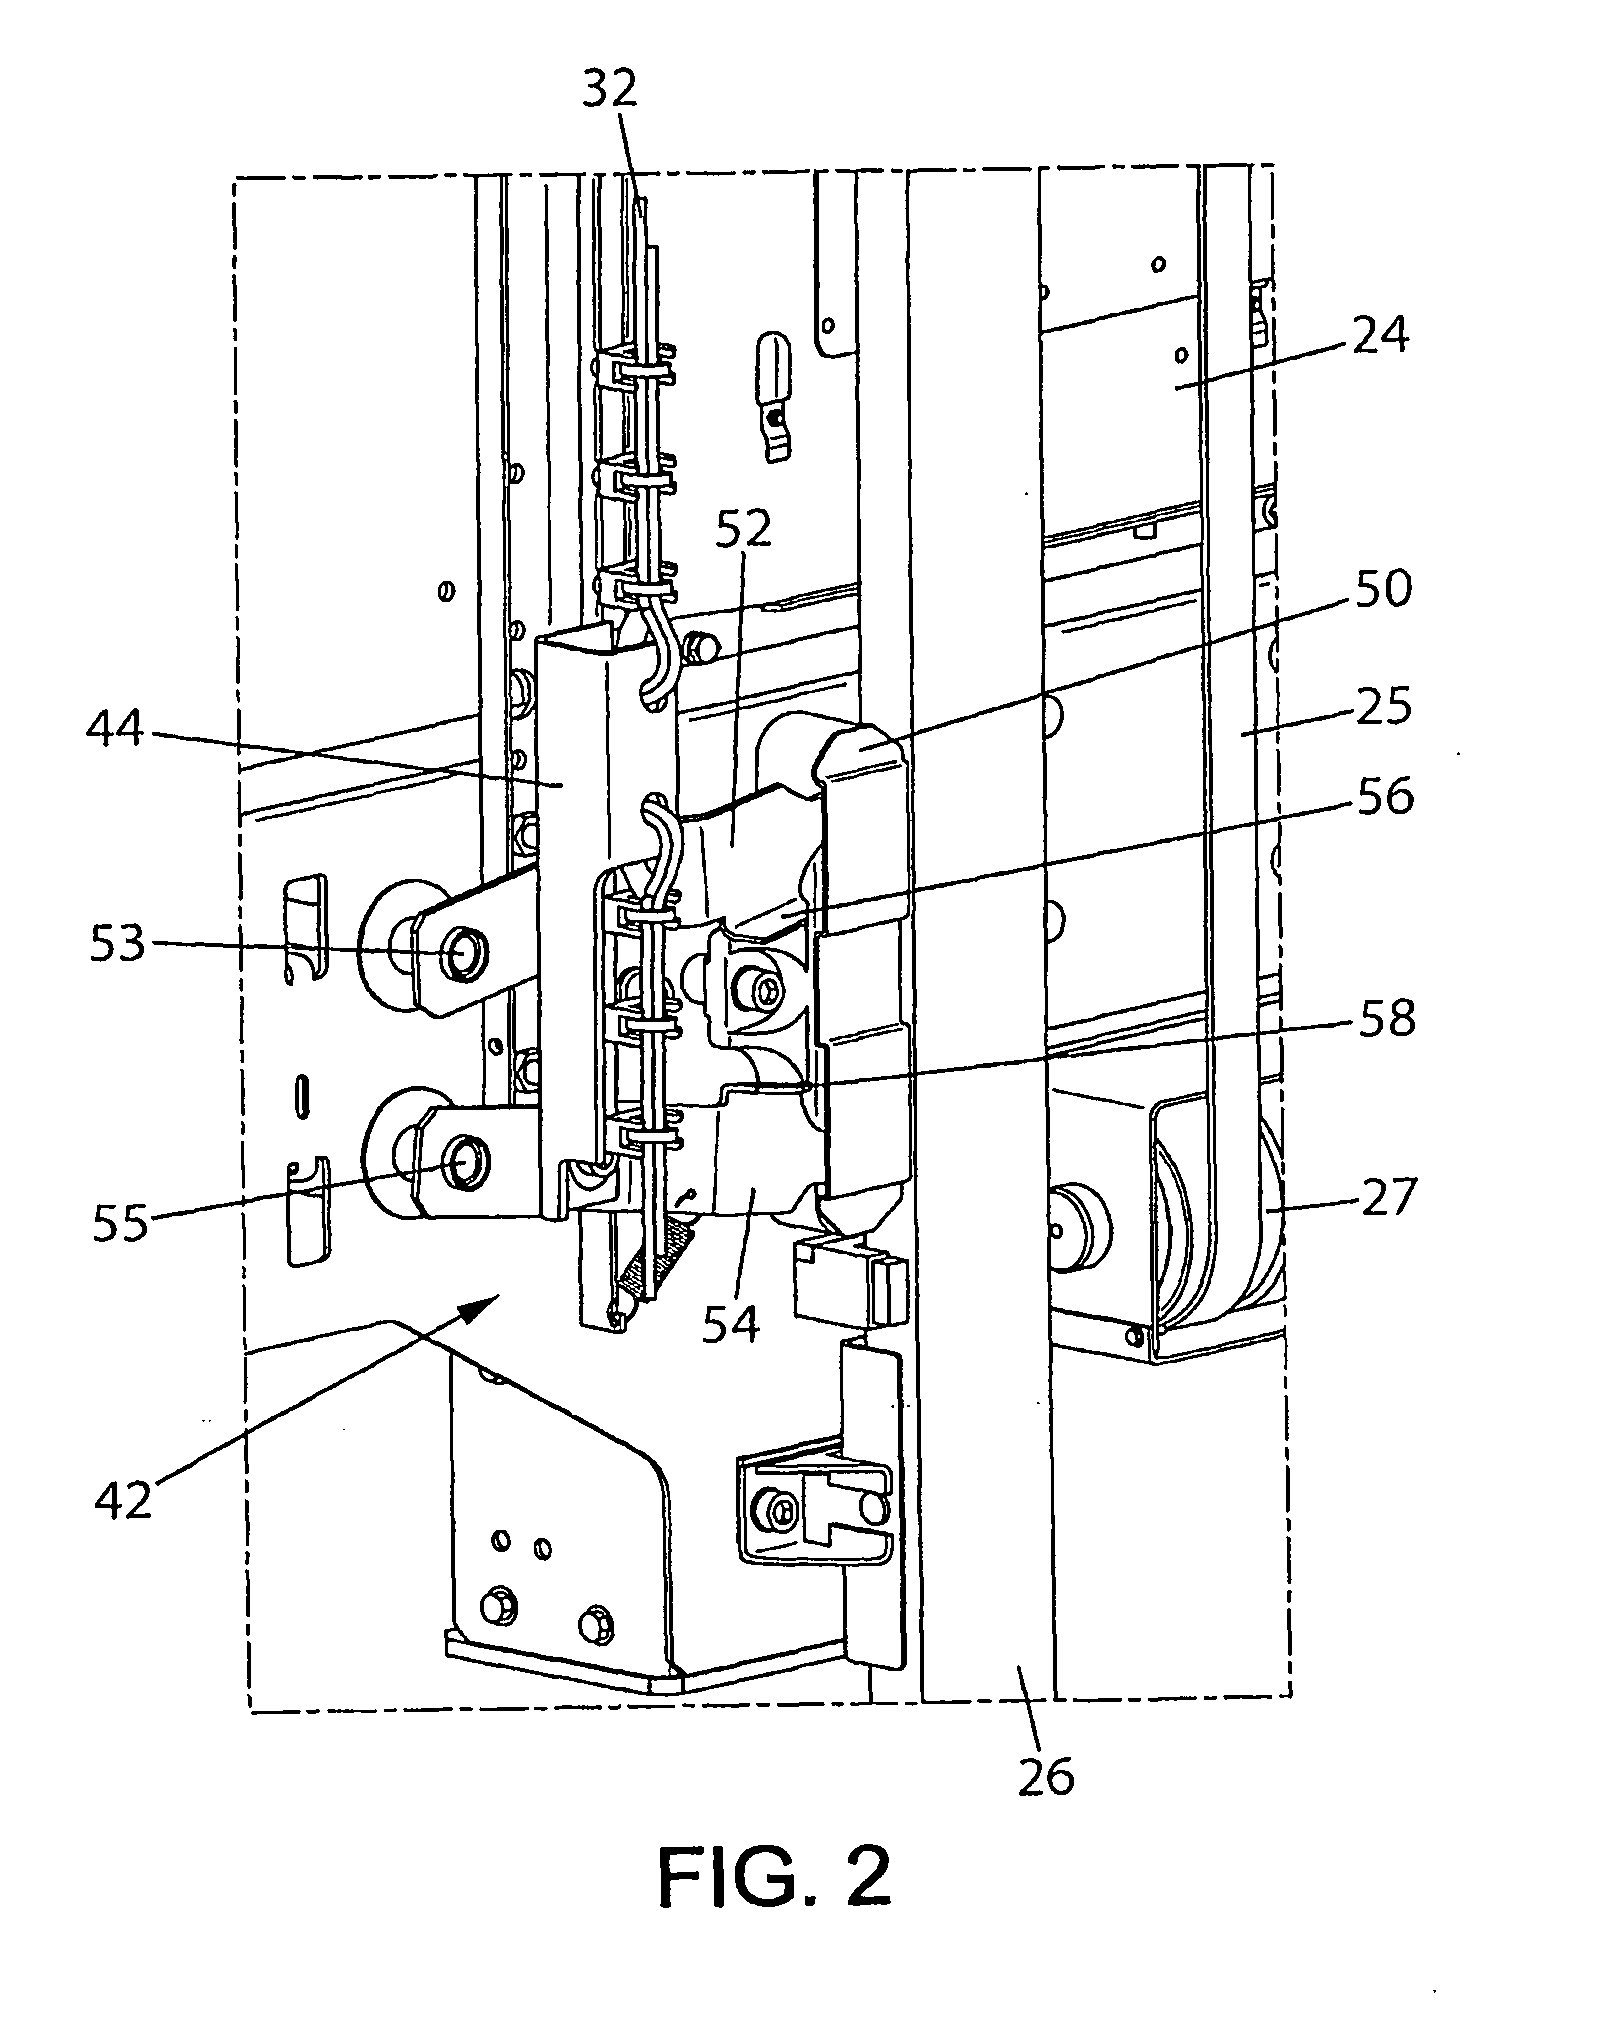 Elevator having a shallow pit and/or a low overhead